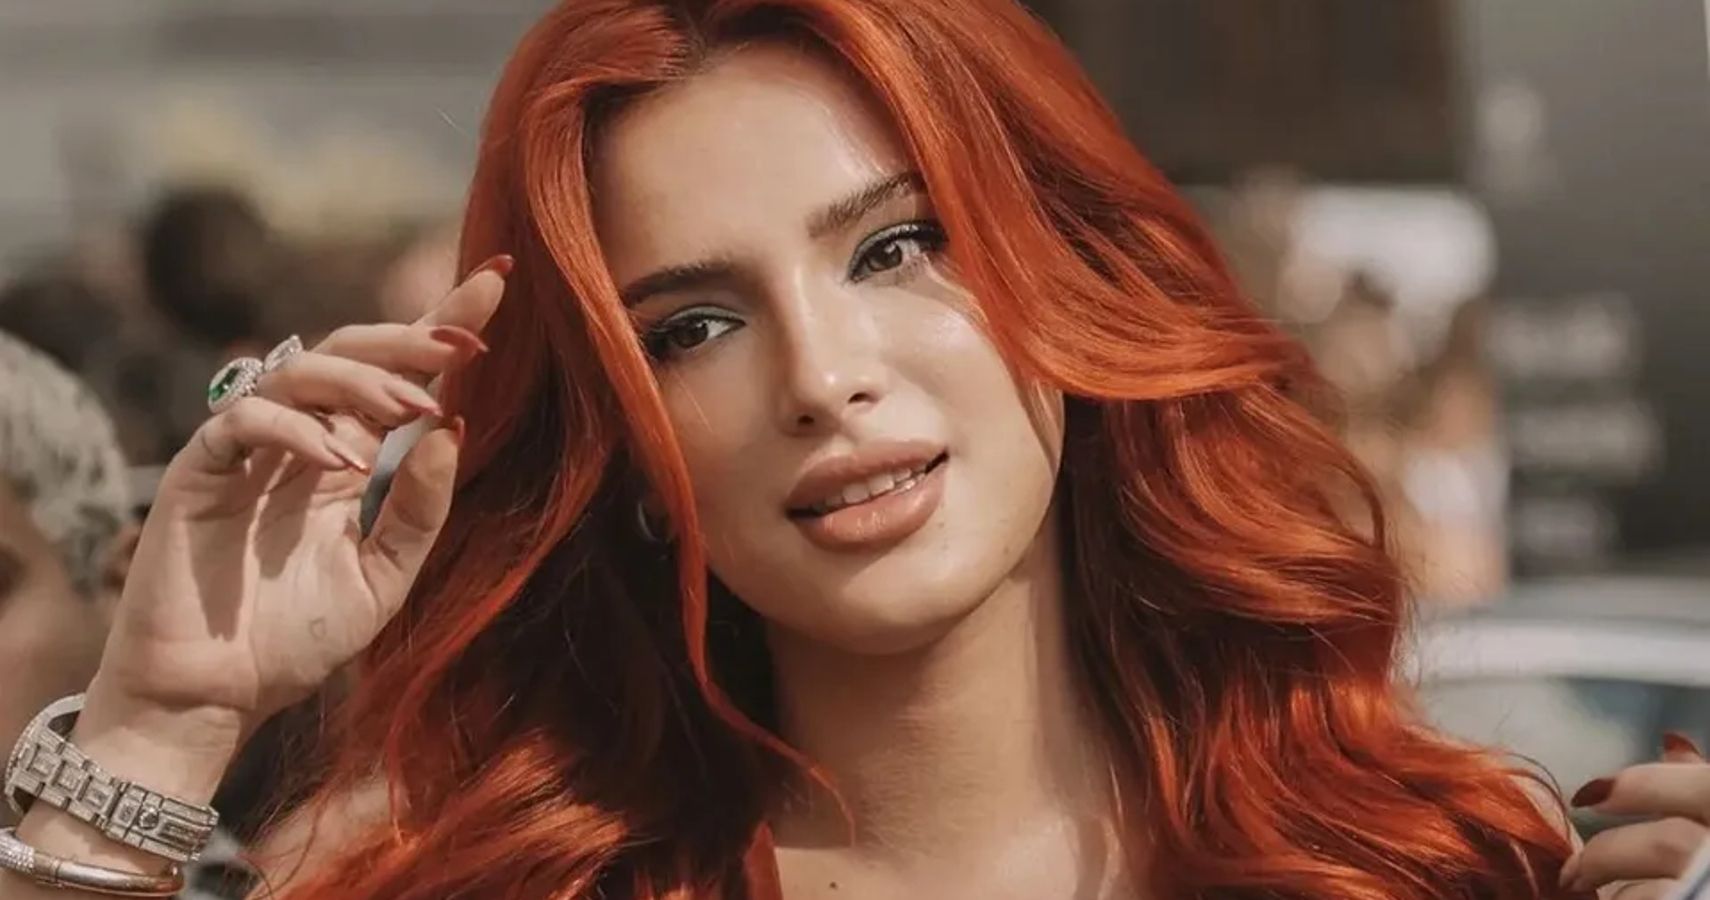 Ashley Tisdale Xxx Porn - Bella Thorne Becomes The First To Earned Over $1 Million In The First 24  Hours From OnlyFans